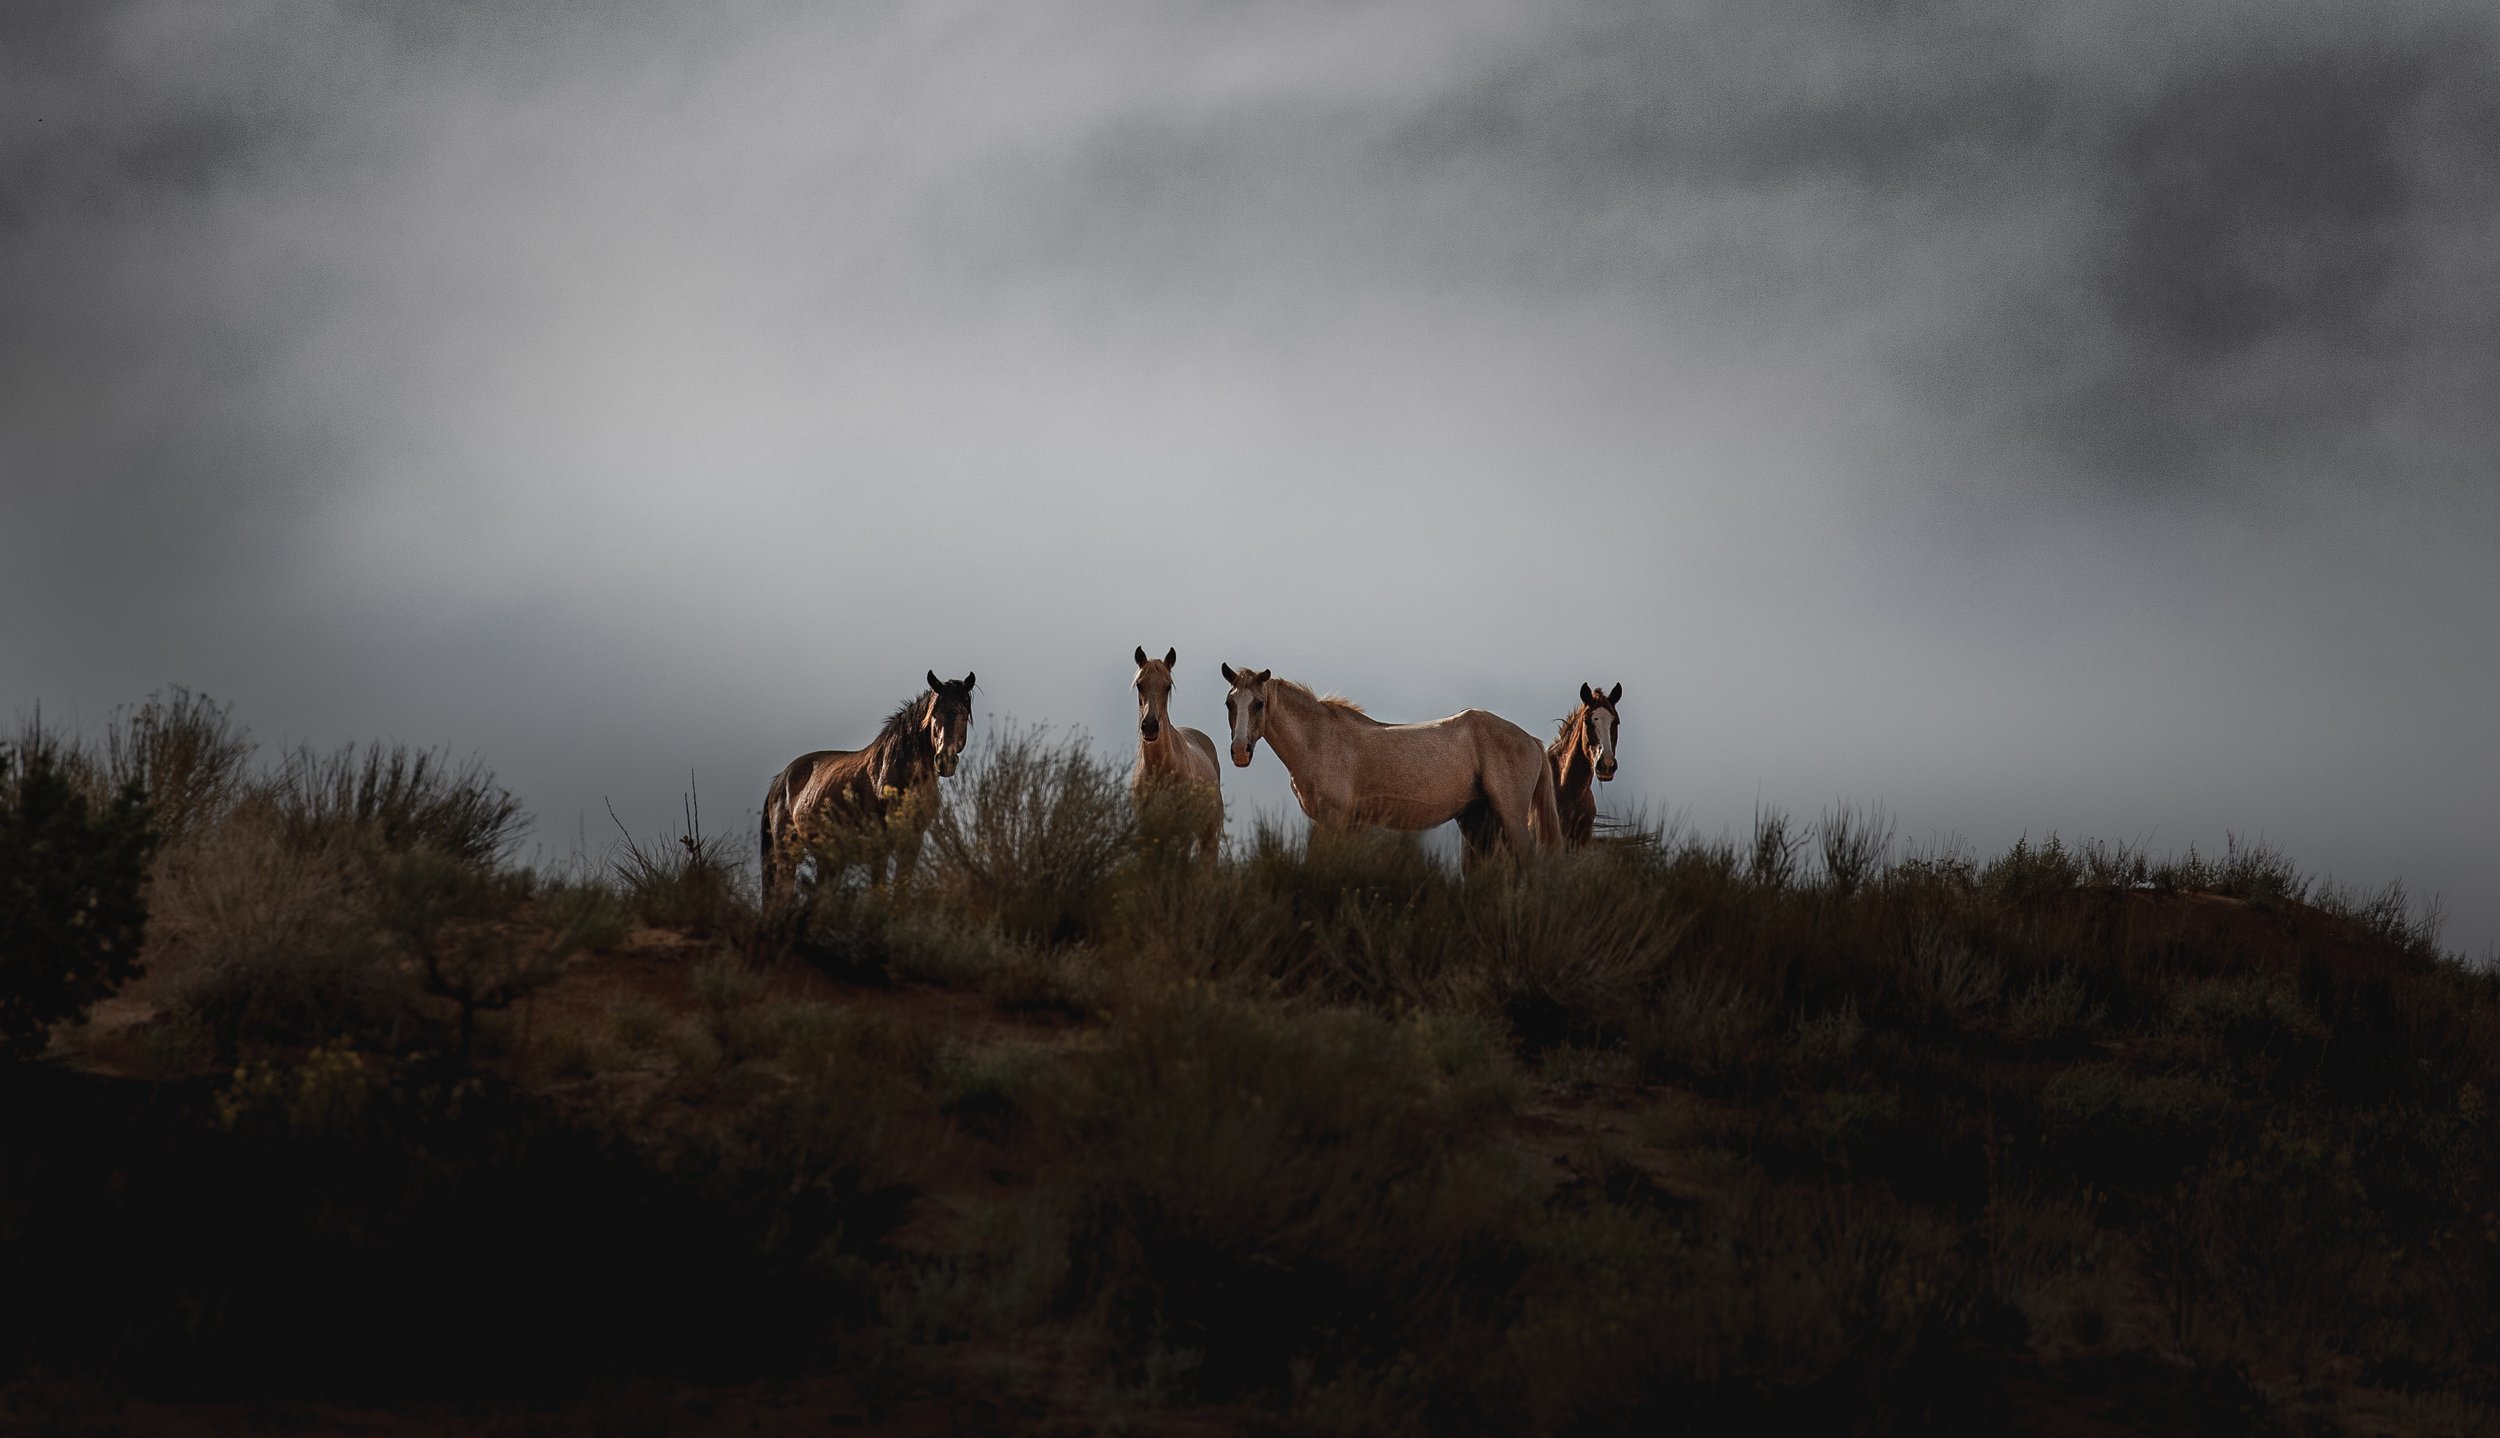  A herd of wild horses peer at us over a ridge at one of the local water collection areas. When Effie collects water for her livestock, she will also make sure these wild herds get water too.  